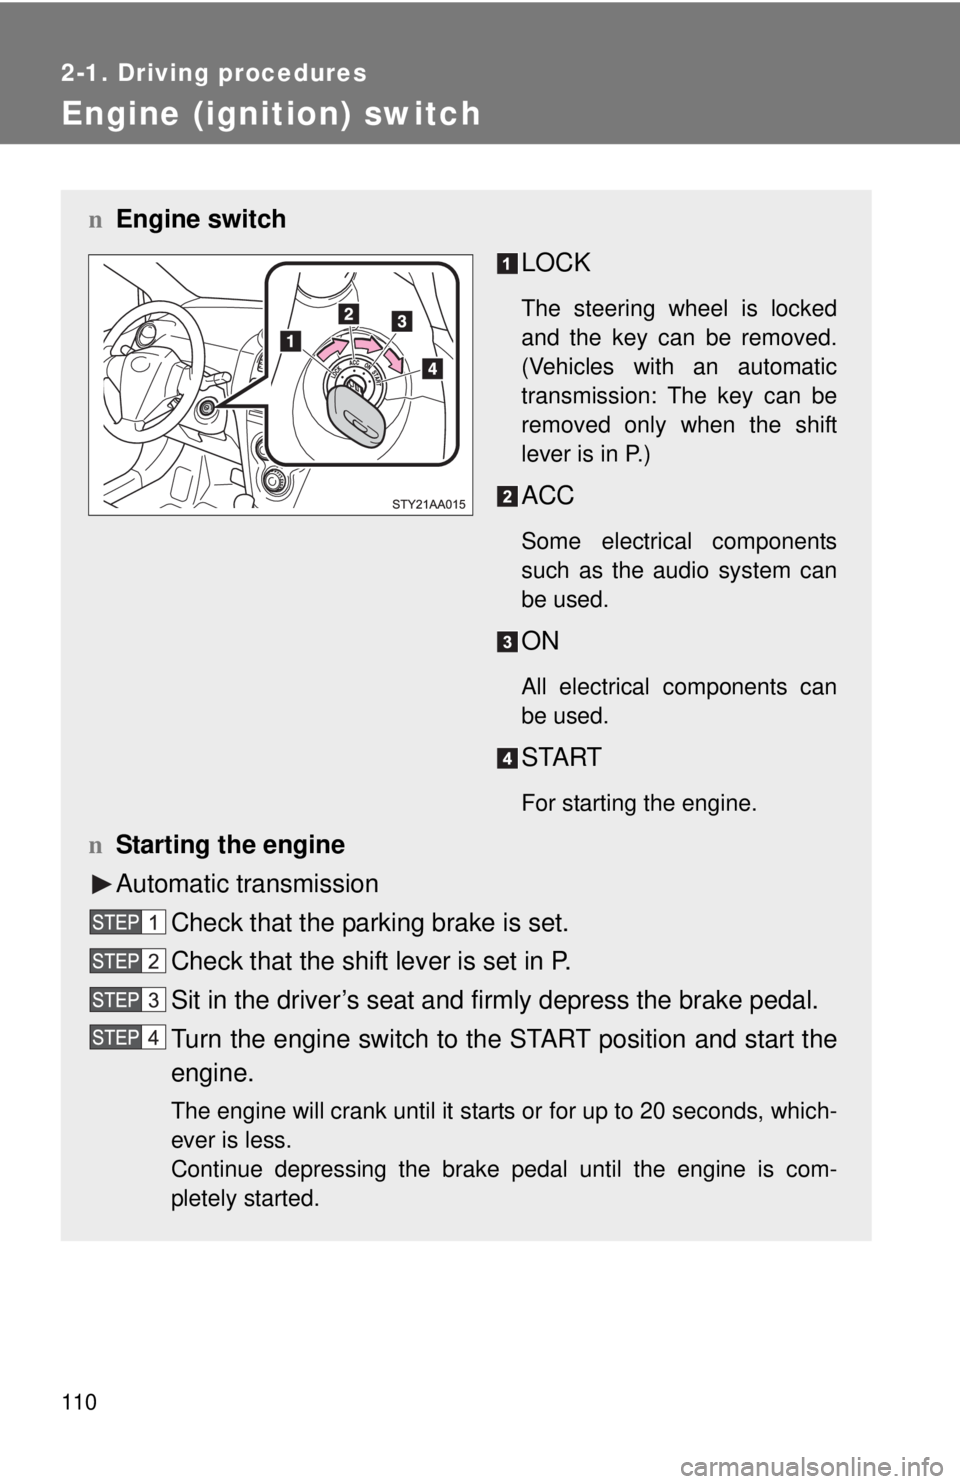 TOYOTA YARIS SEDAN 2010  Owners Manual 110
2-1. Driving procedures
Engine (ignition) switch 
nEngine switch
LOCK
The steering wheel is locked
and the key can be removed.
(Vehicles with an automatic
transmission: The key can be
removed only